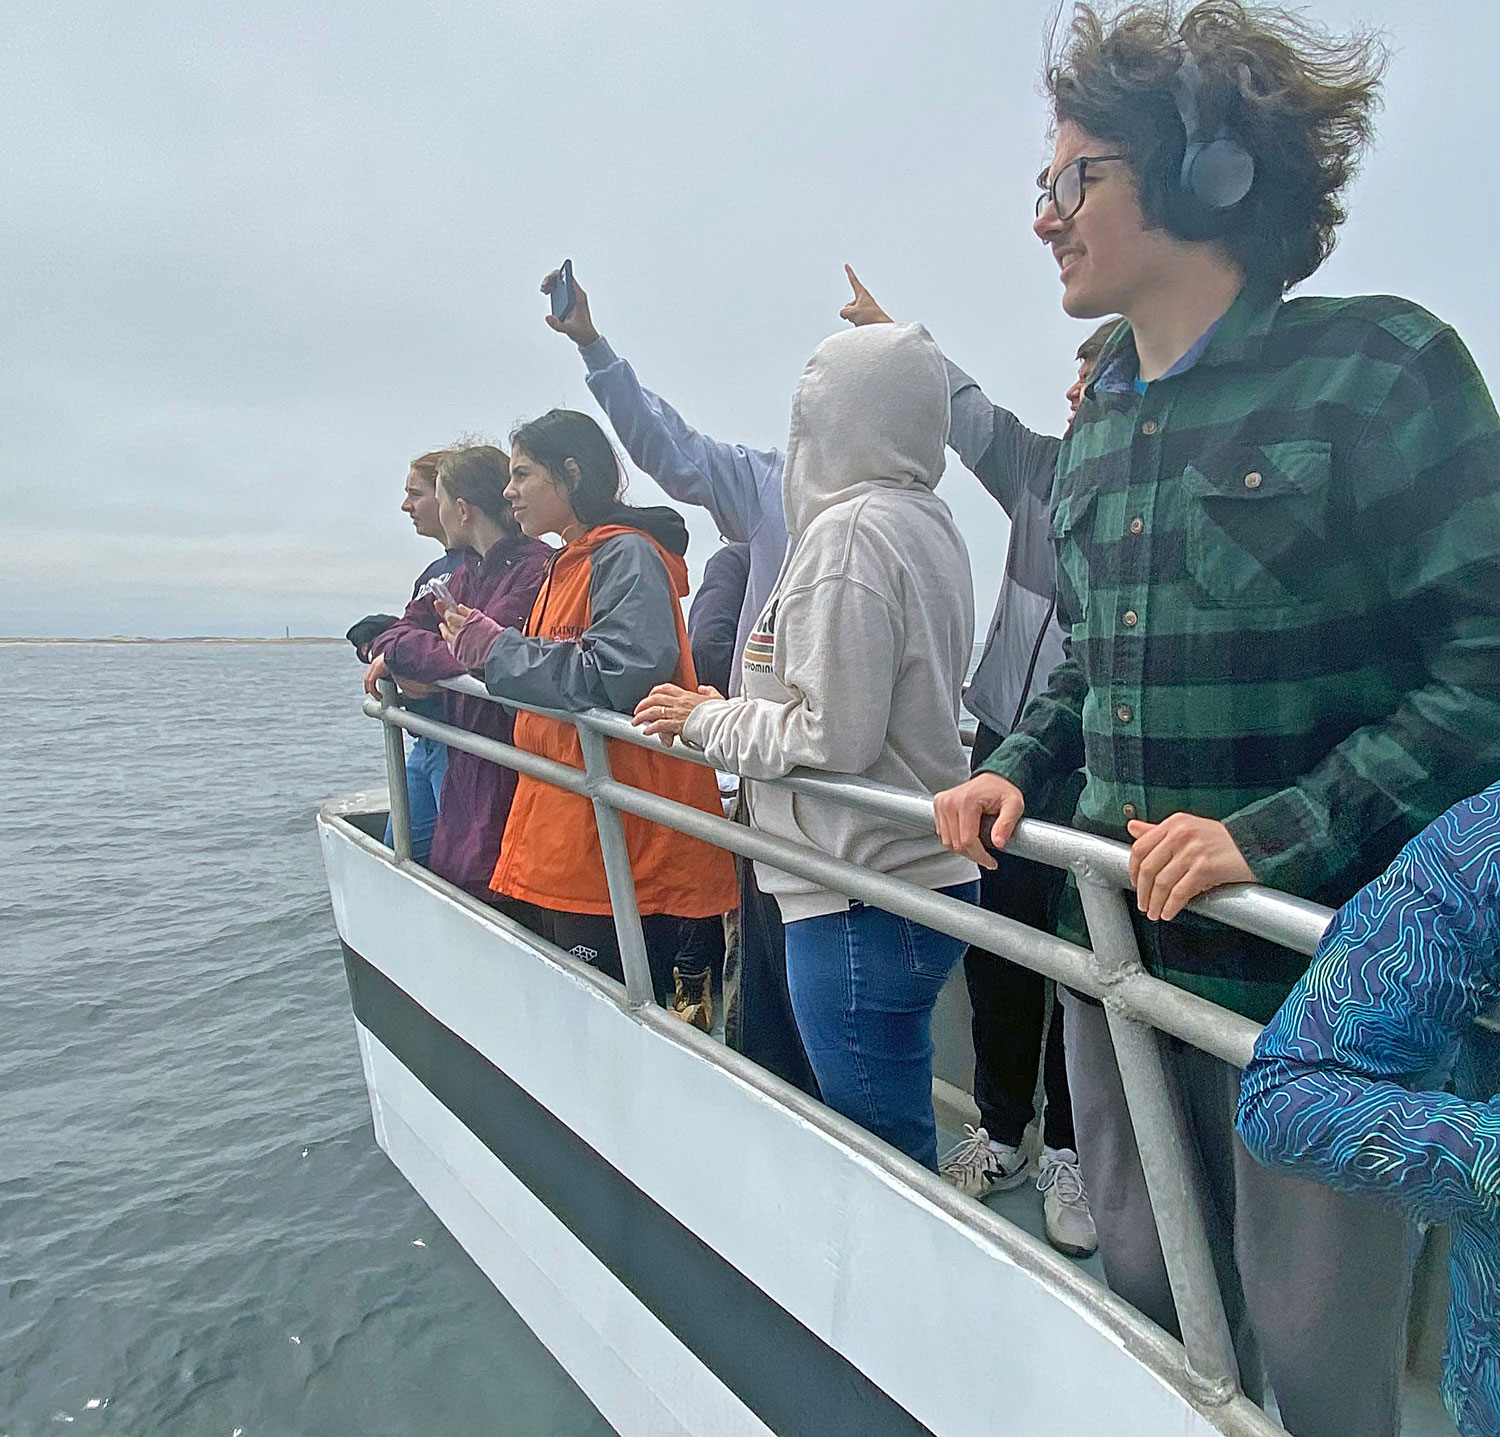 Students whale watching